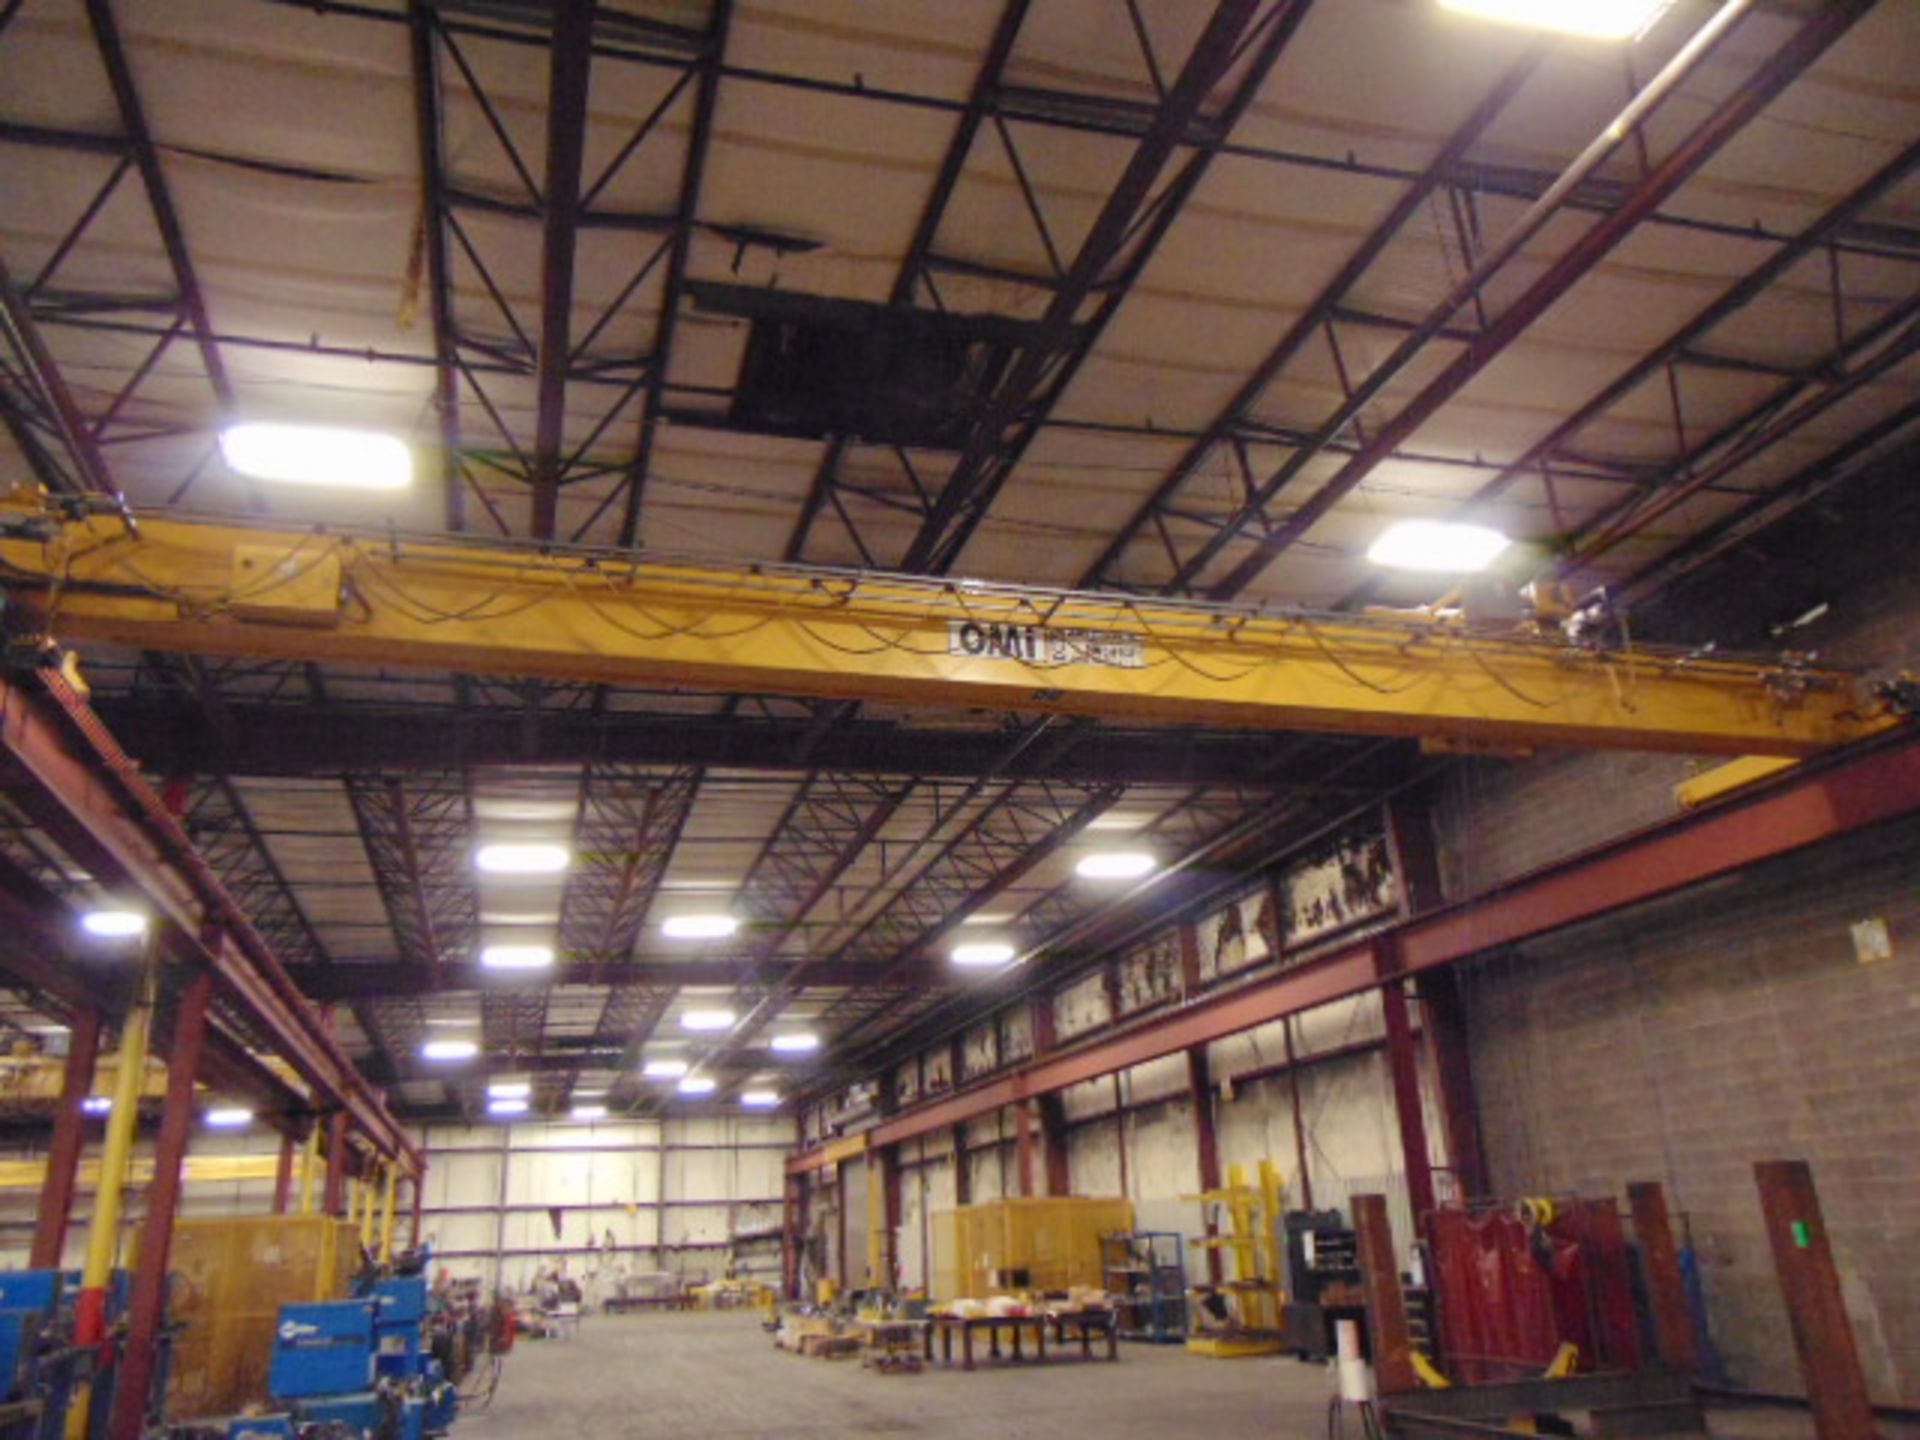 FREE STANDING CRANE SYSTEM, OMI 5 T. CAP., new 2012, approx. 44’ span, 350’L., 16’-8” ht. under - Image 7 of 13